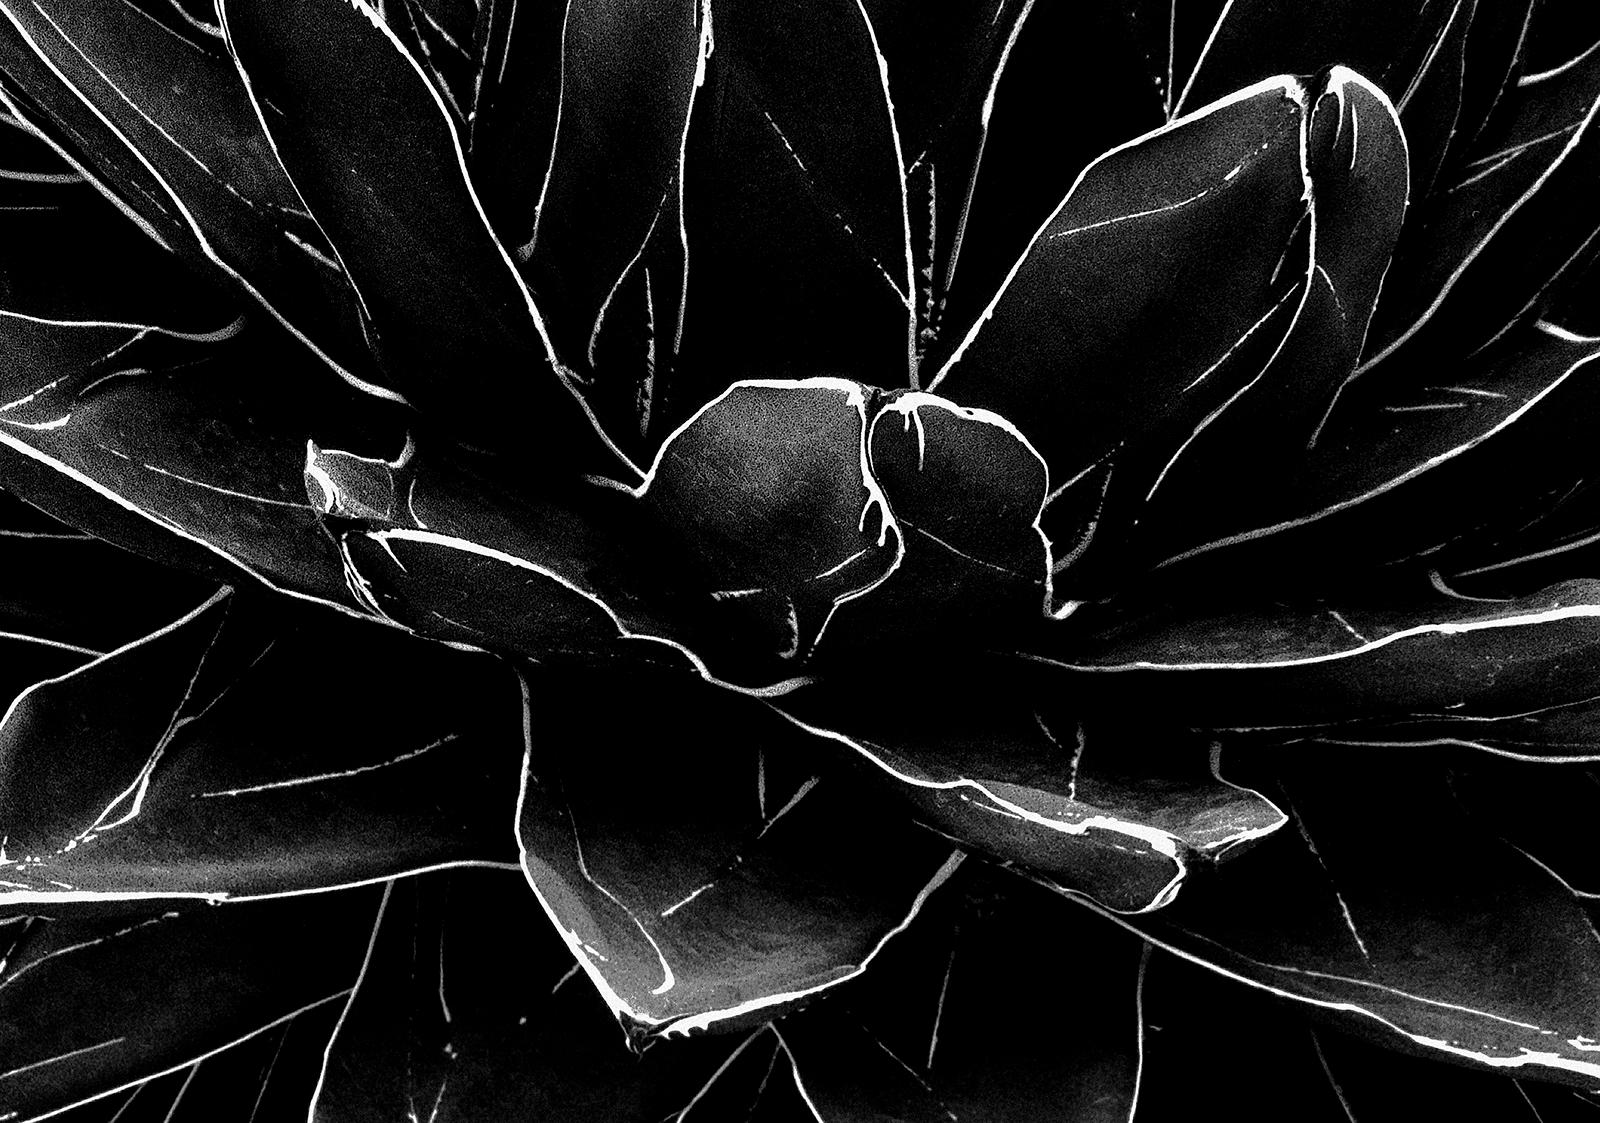 Cactus-Signed limited edition still life print, Black white nature, Contemporary - Photograph by Ian Sanderson